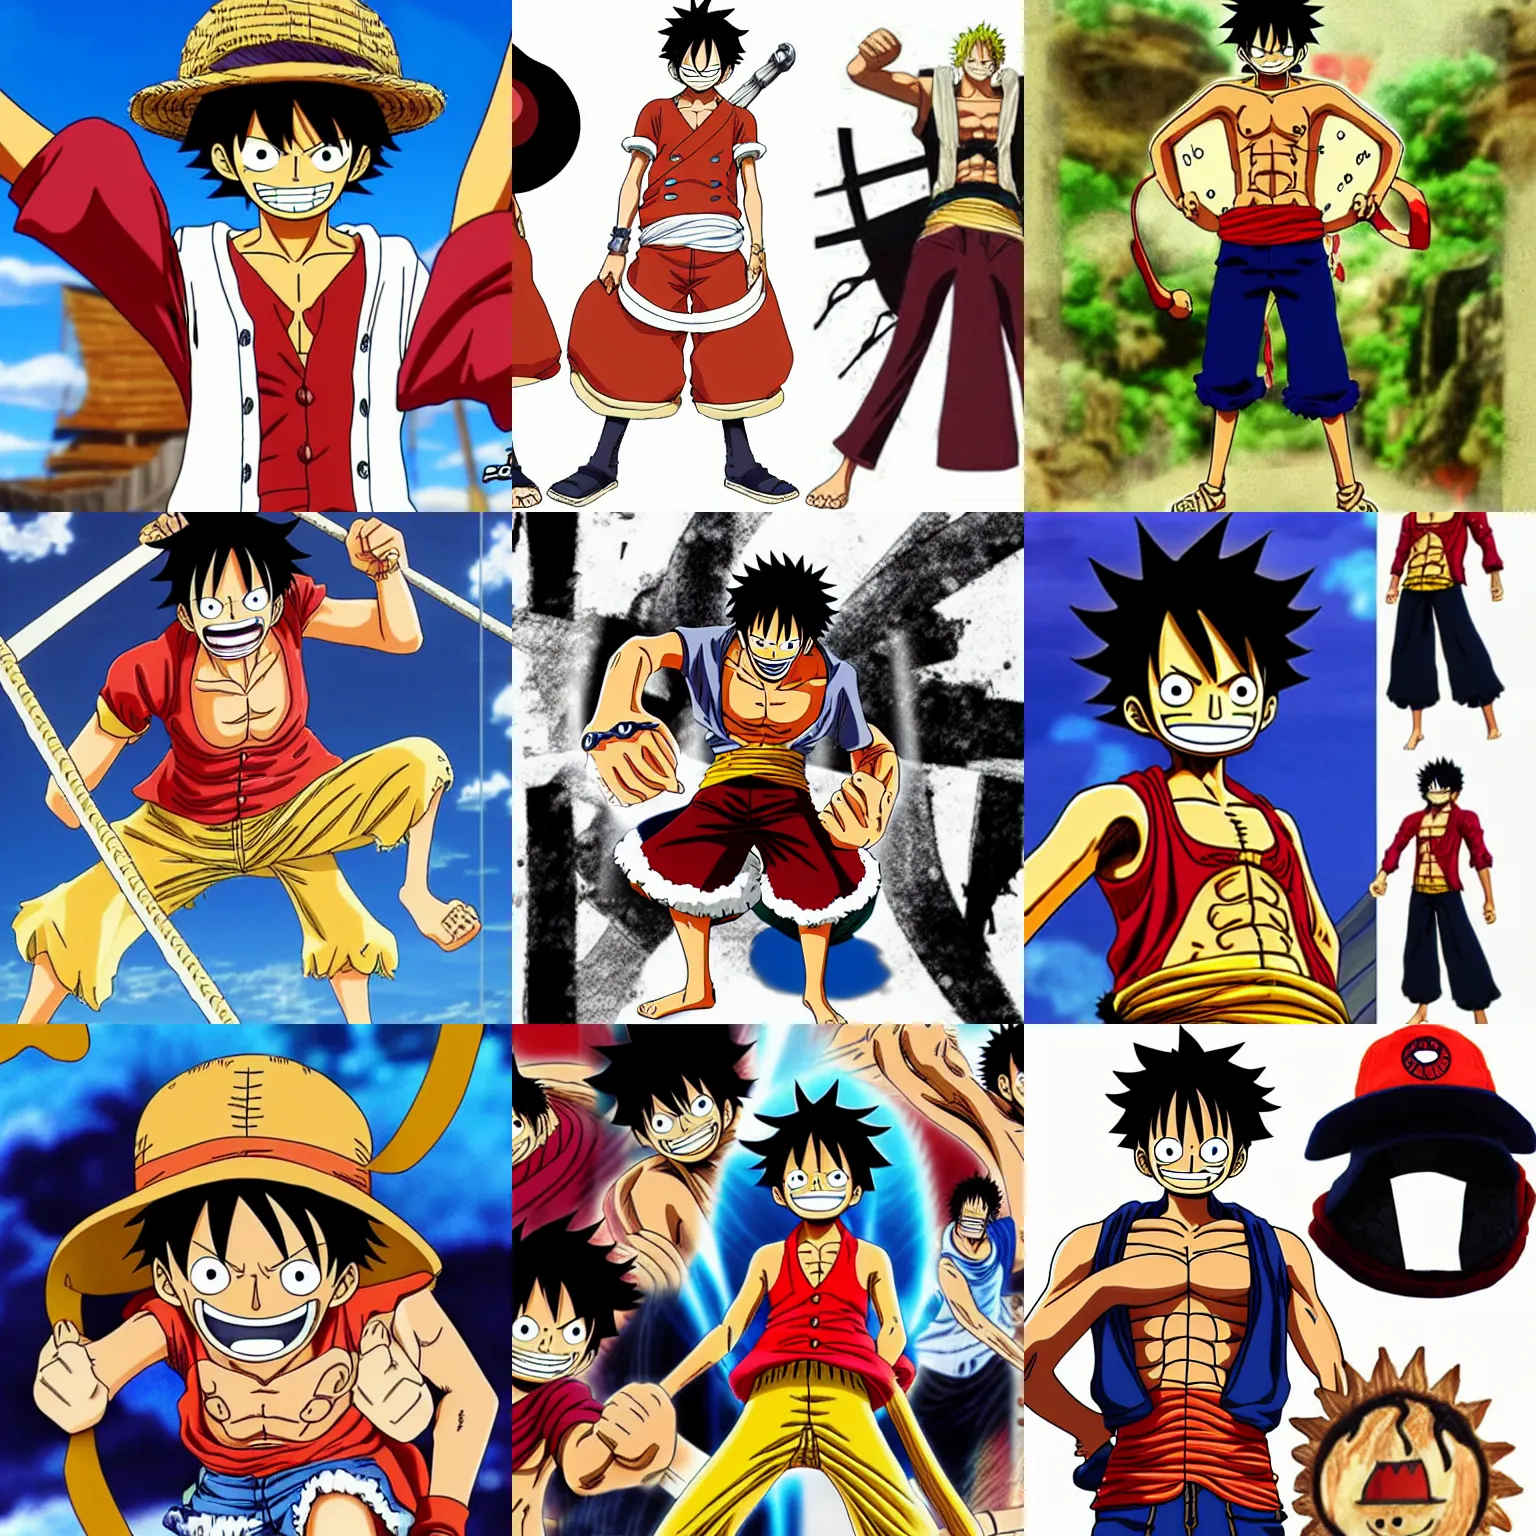 luffy's gear 5 one piece, anime, Stable Diffusion